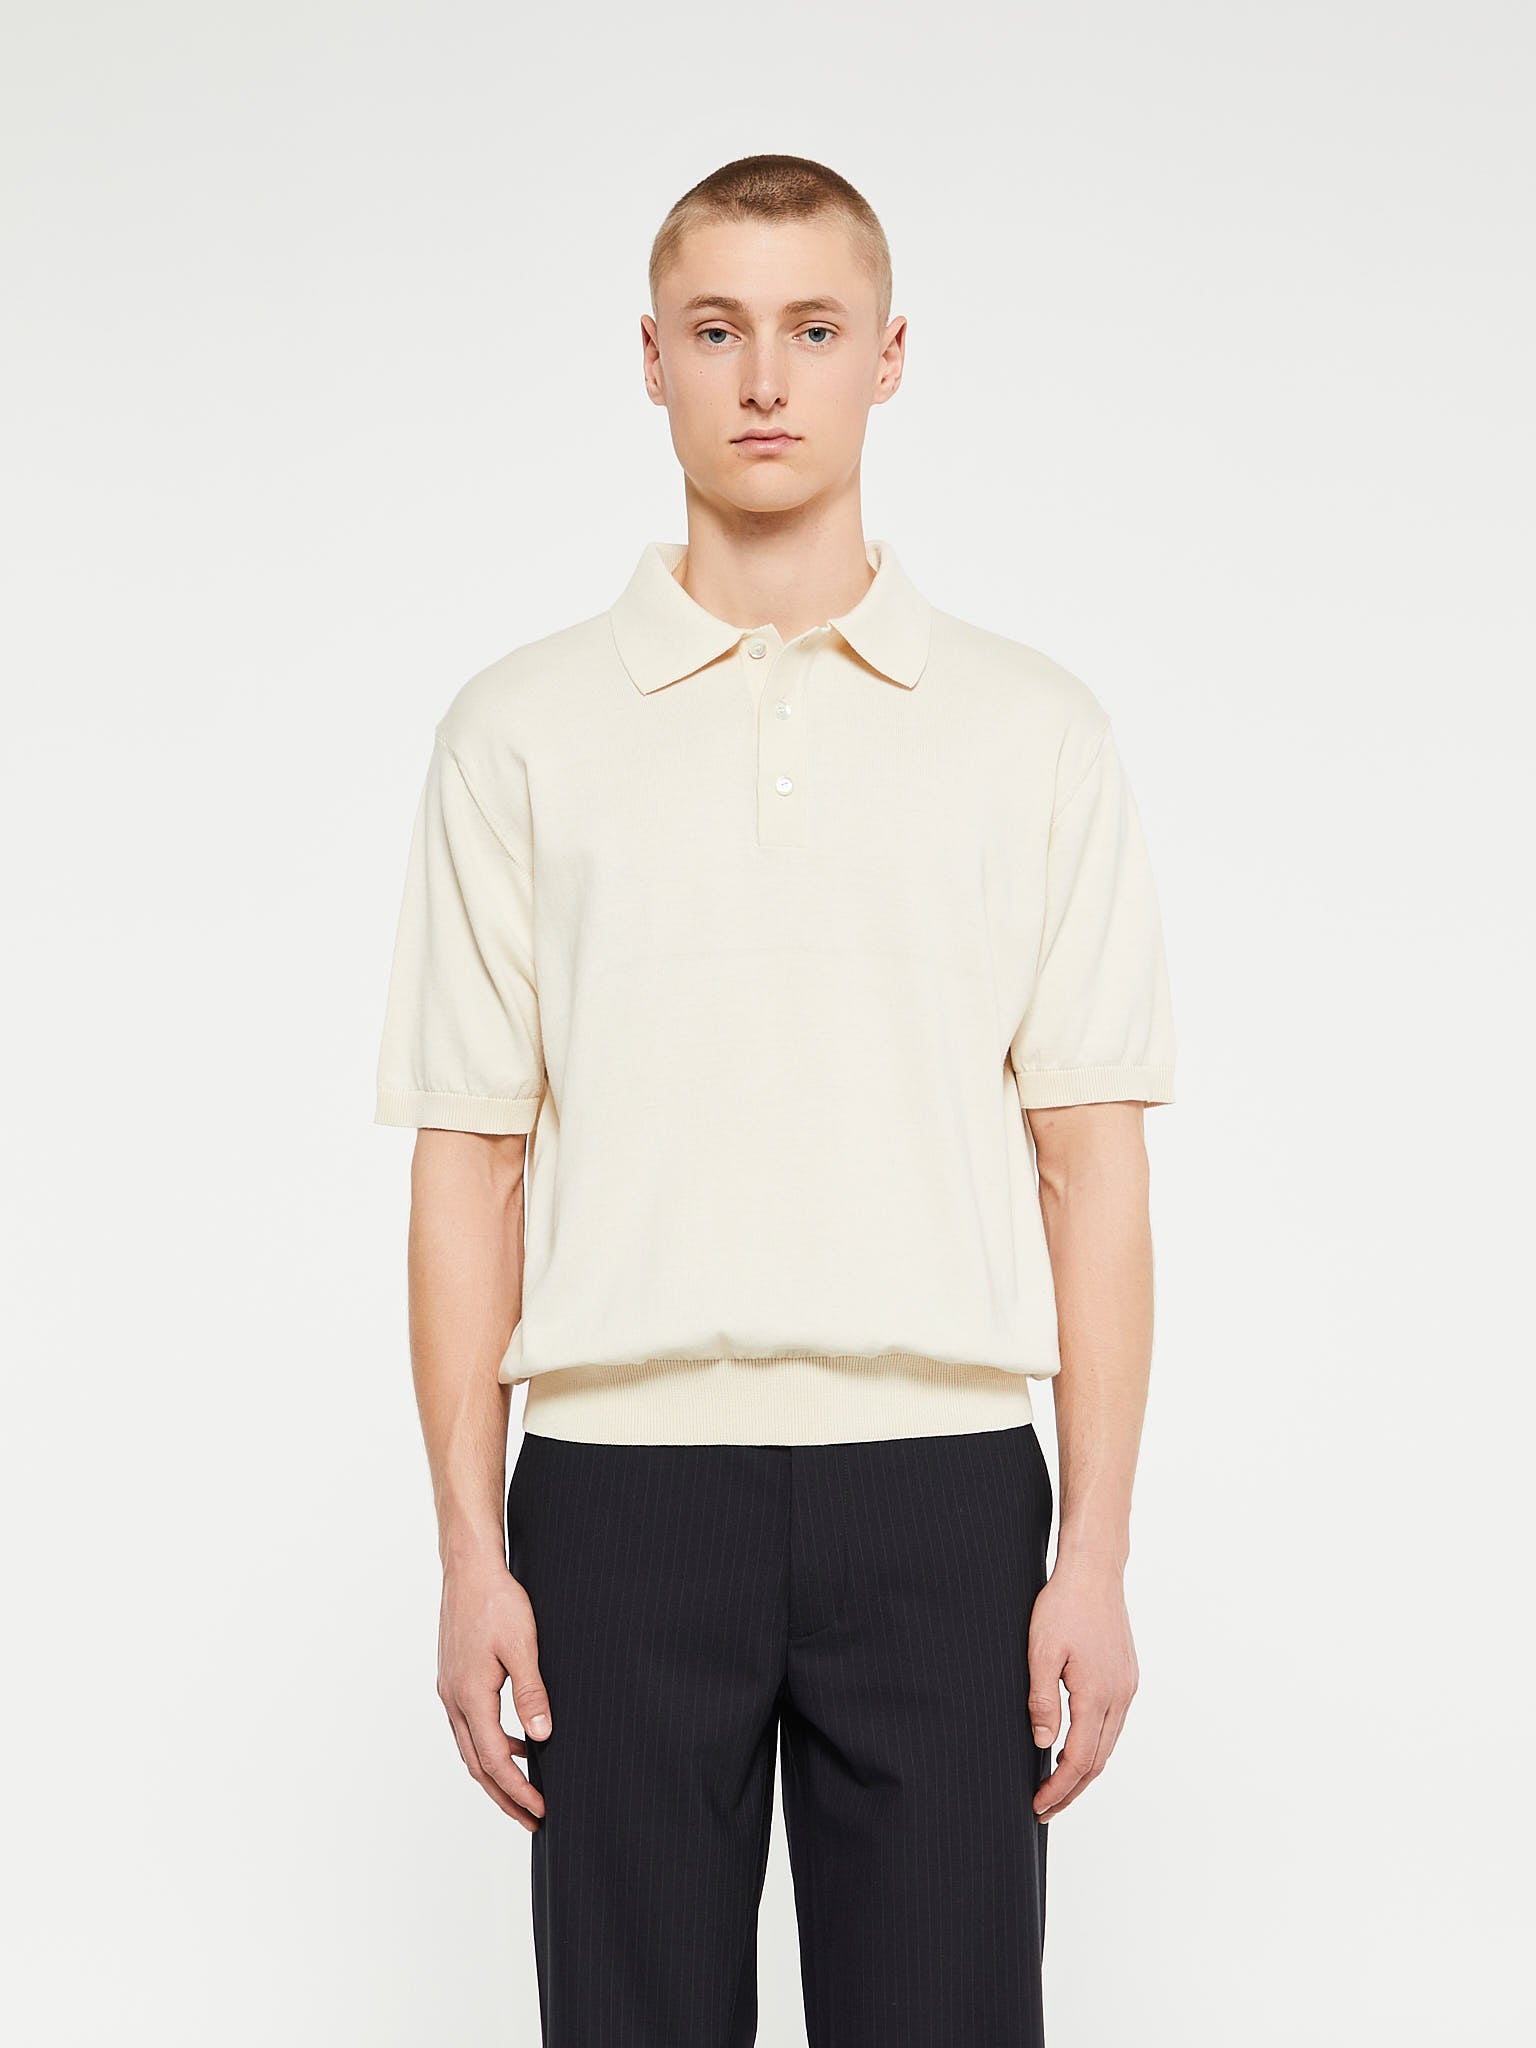 Another Aspect - Another Polo Shirt 3.0 in Beige